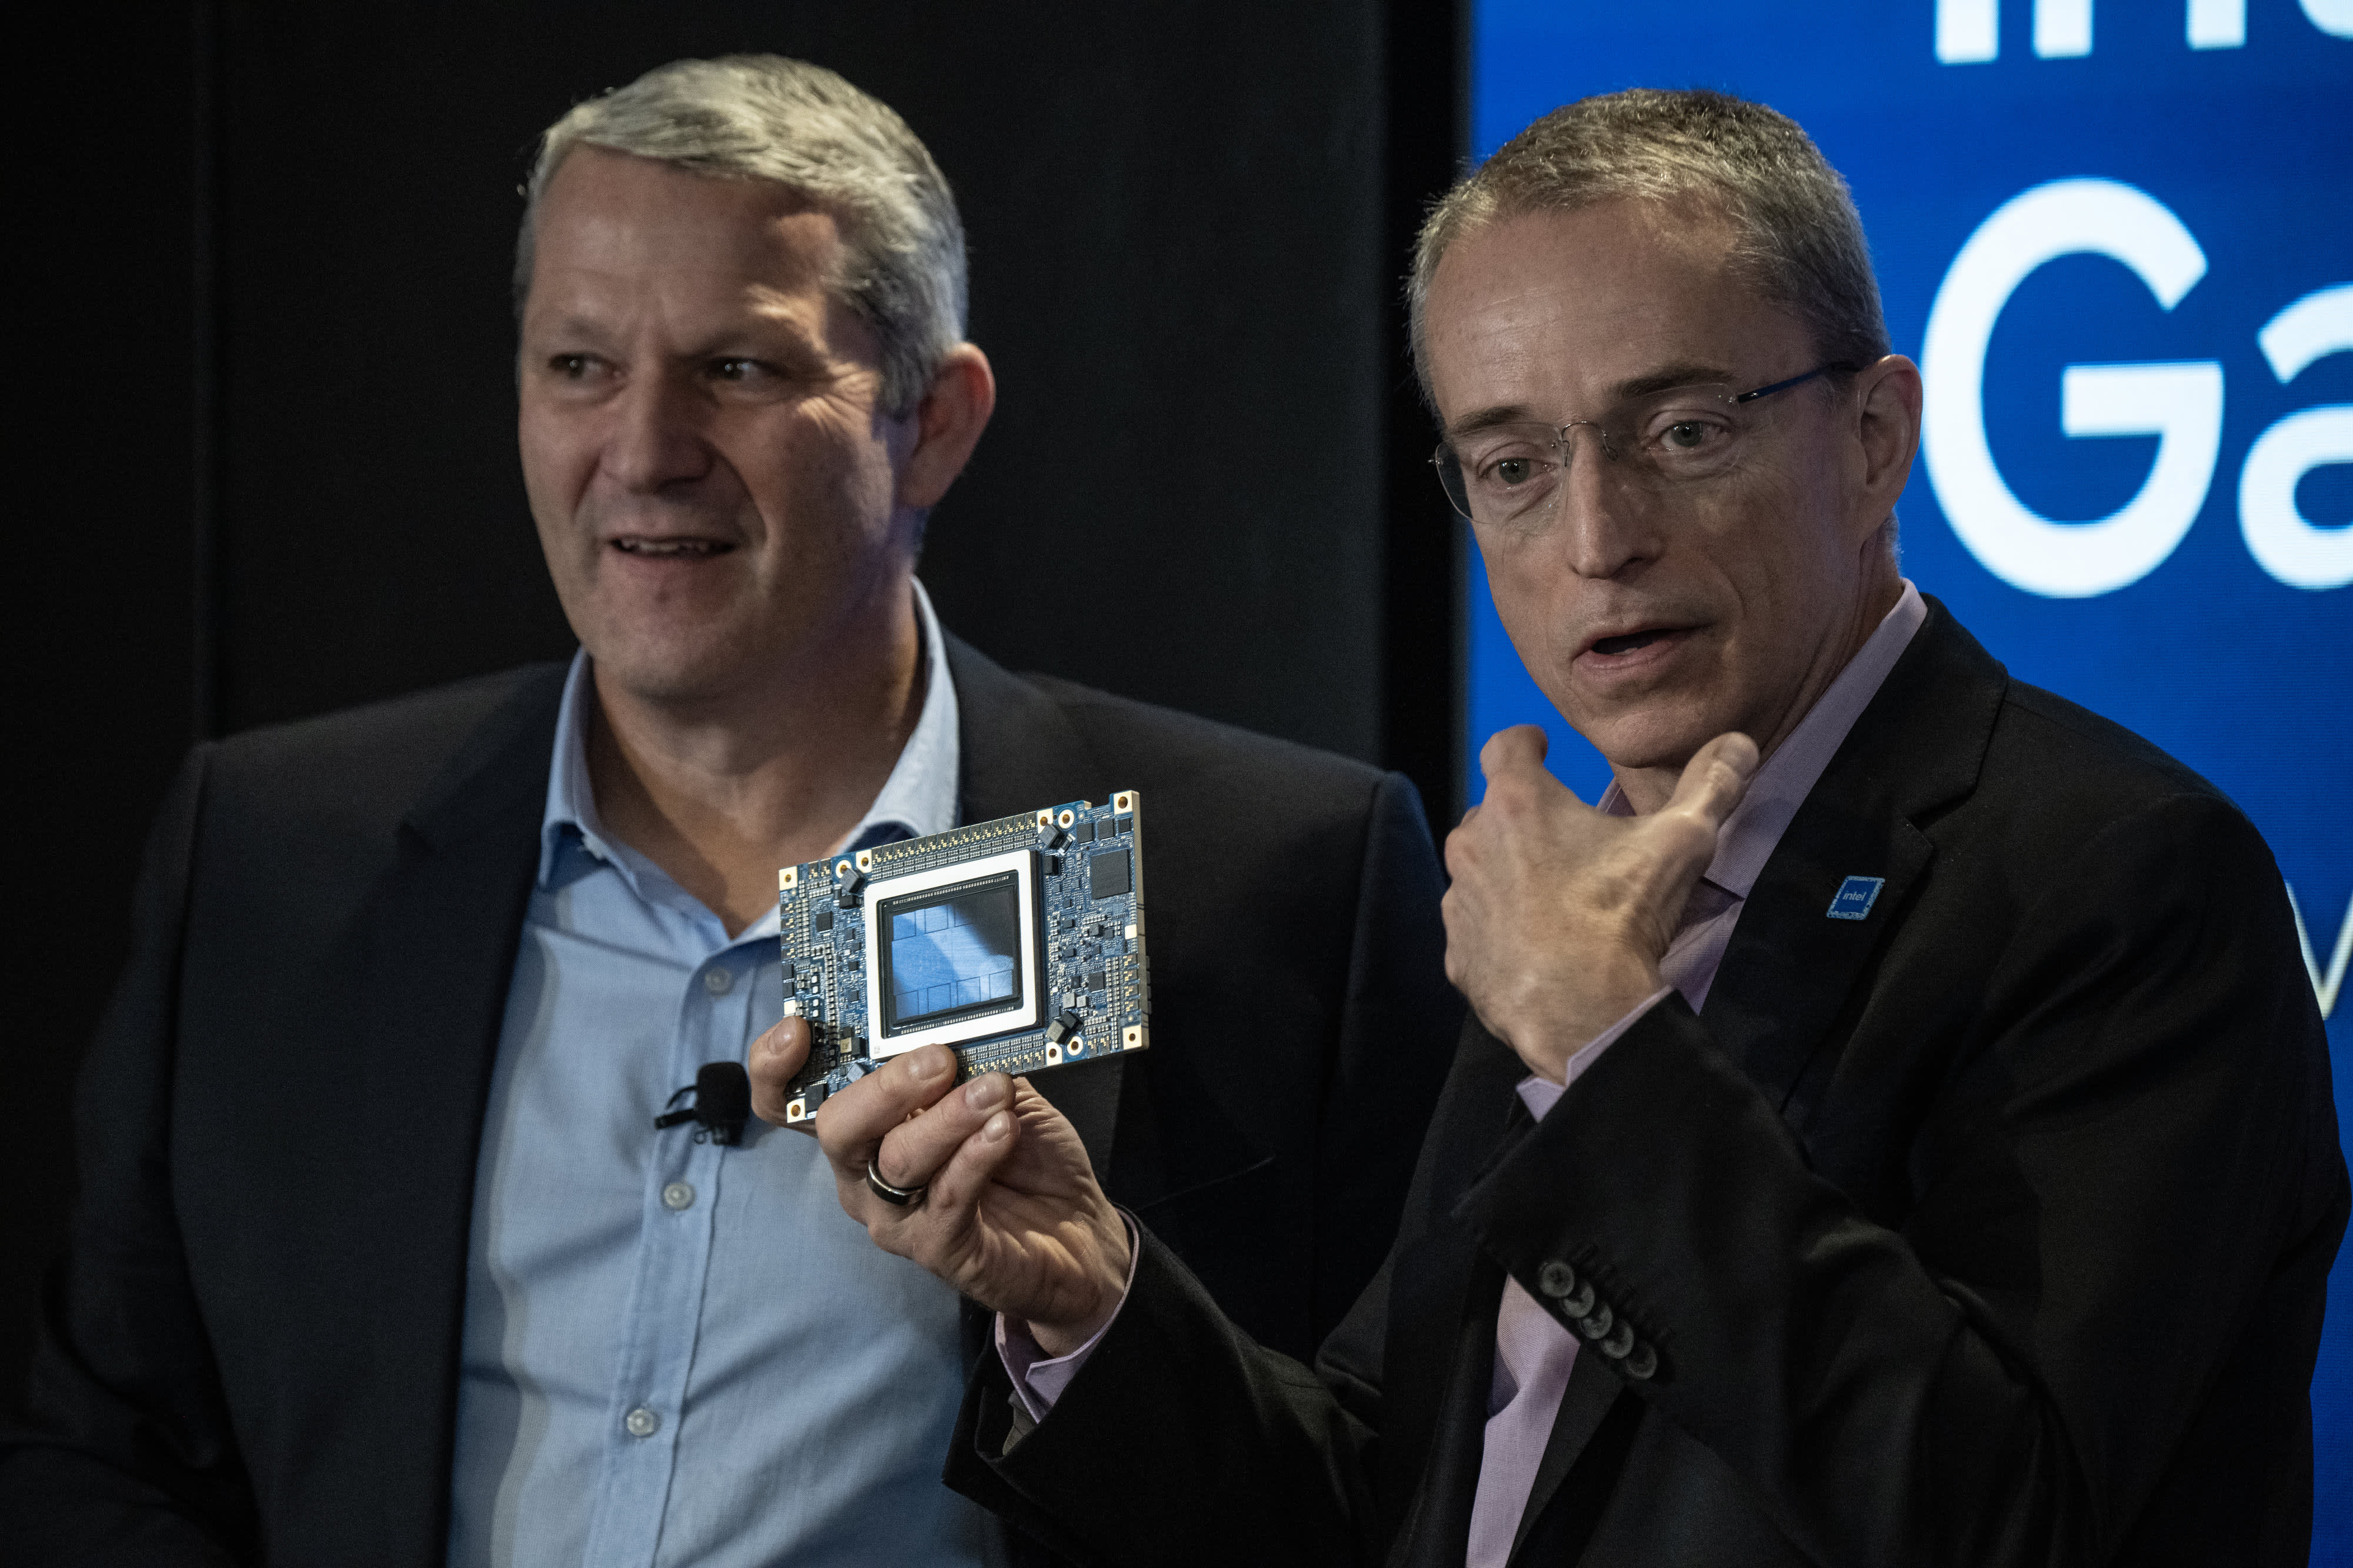 Intel announces Gaudi3 AI chip to compete with NVIDIA and AMD